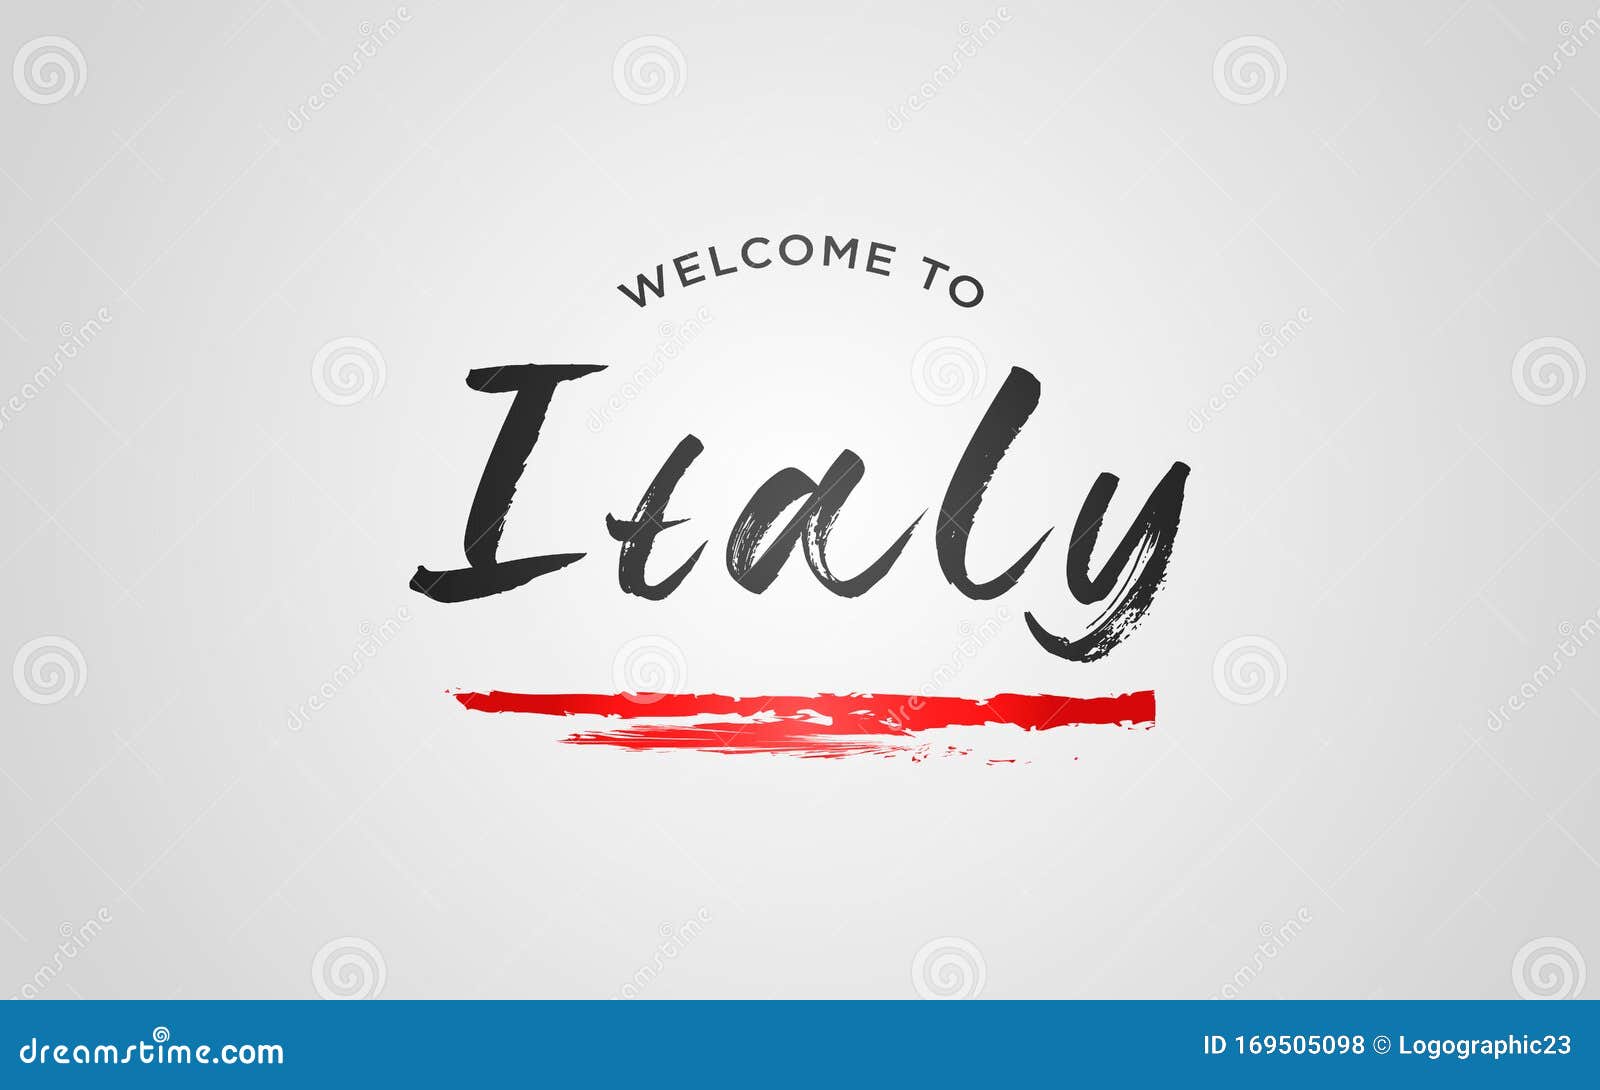 Italy Welcome To Word Text stock vector. Illustration of label - 169505098